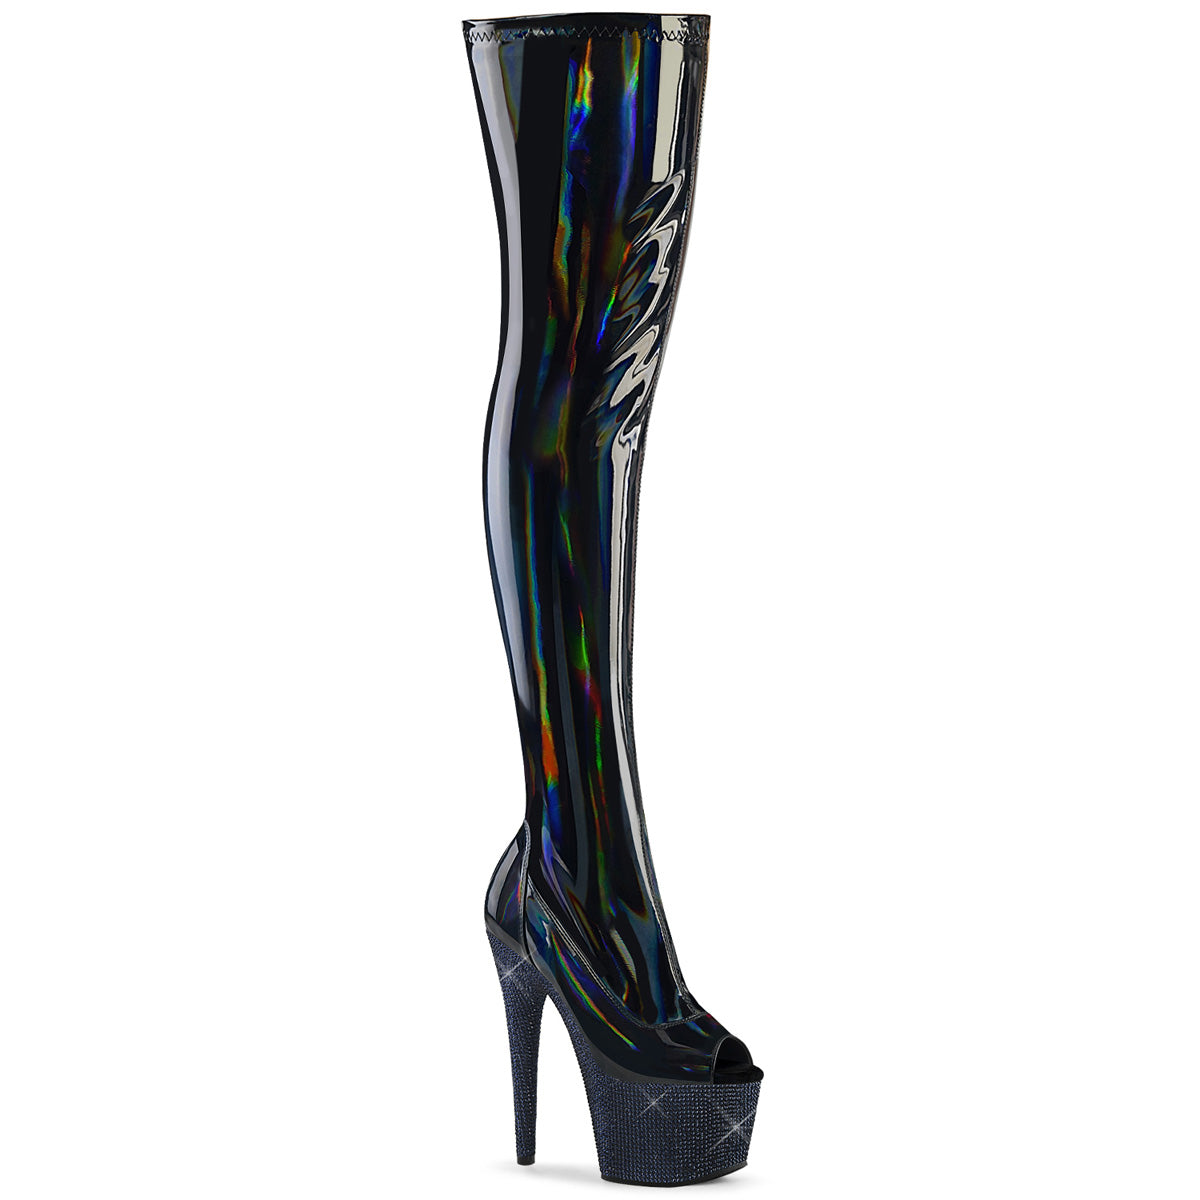 BEJEWELED-3011-7 Thigh High Boots Black Multi view 1